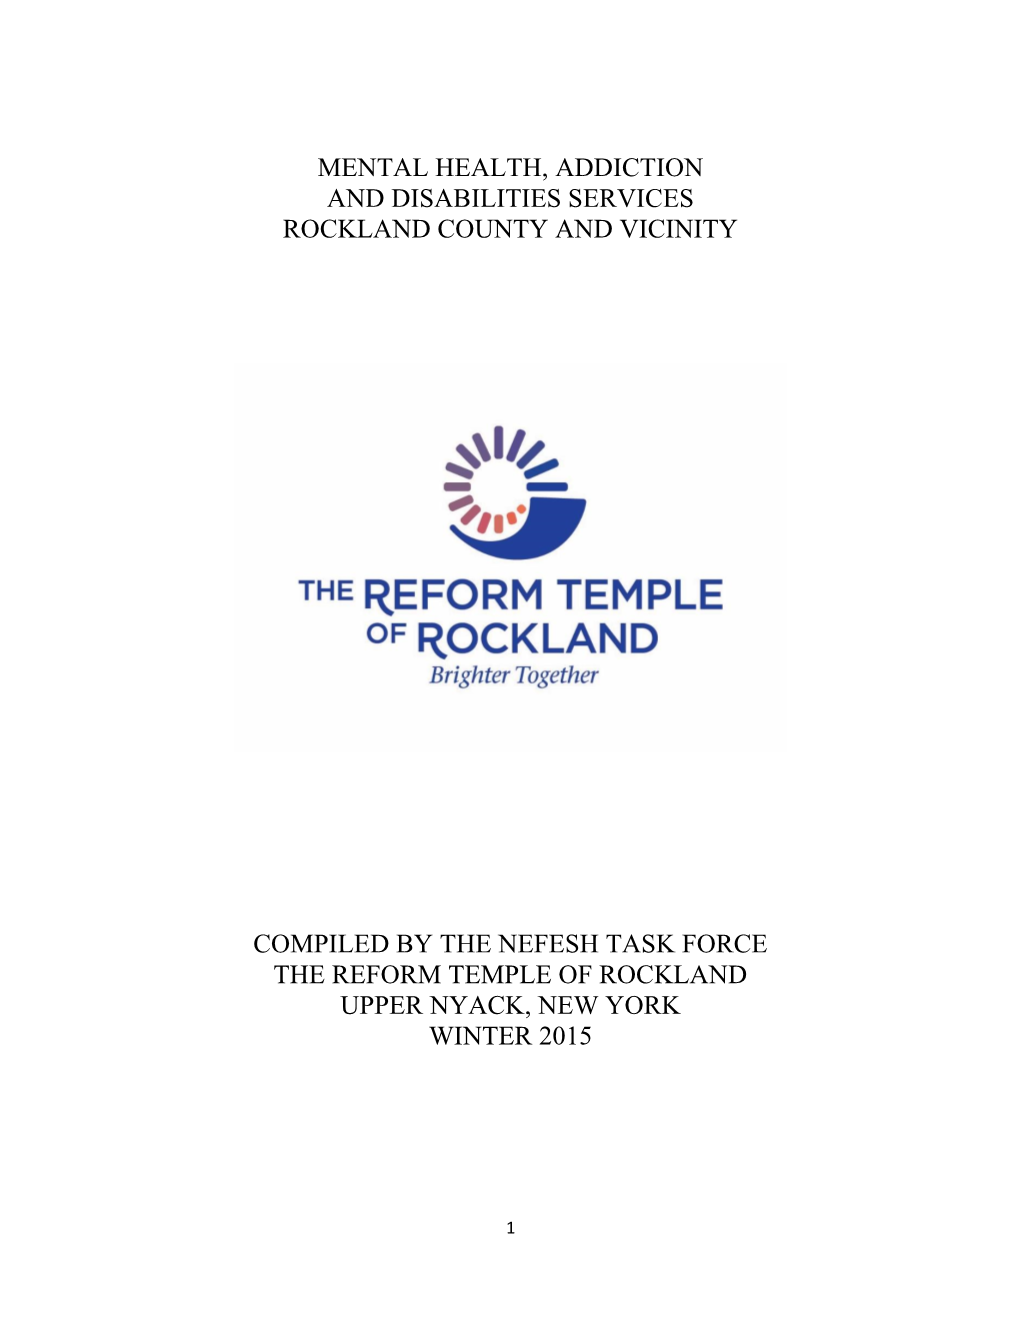 Mental Health, Addiction and Disabilities Services in Rockland